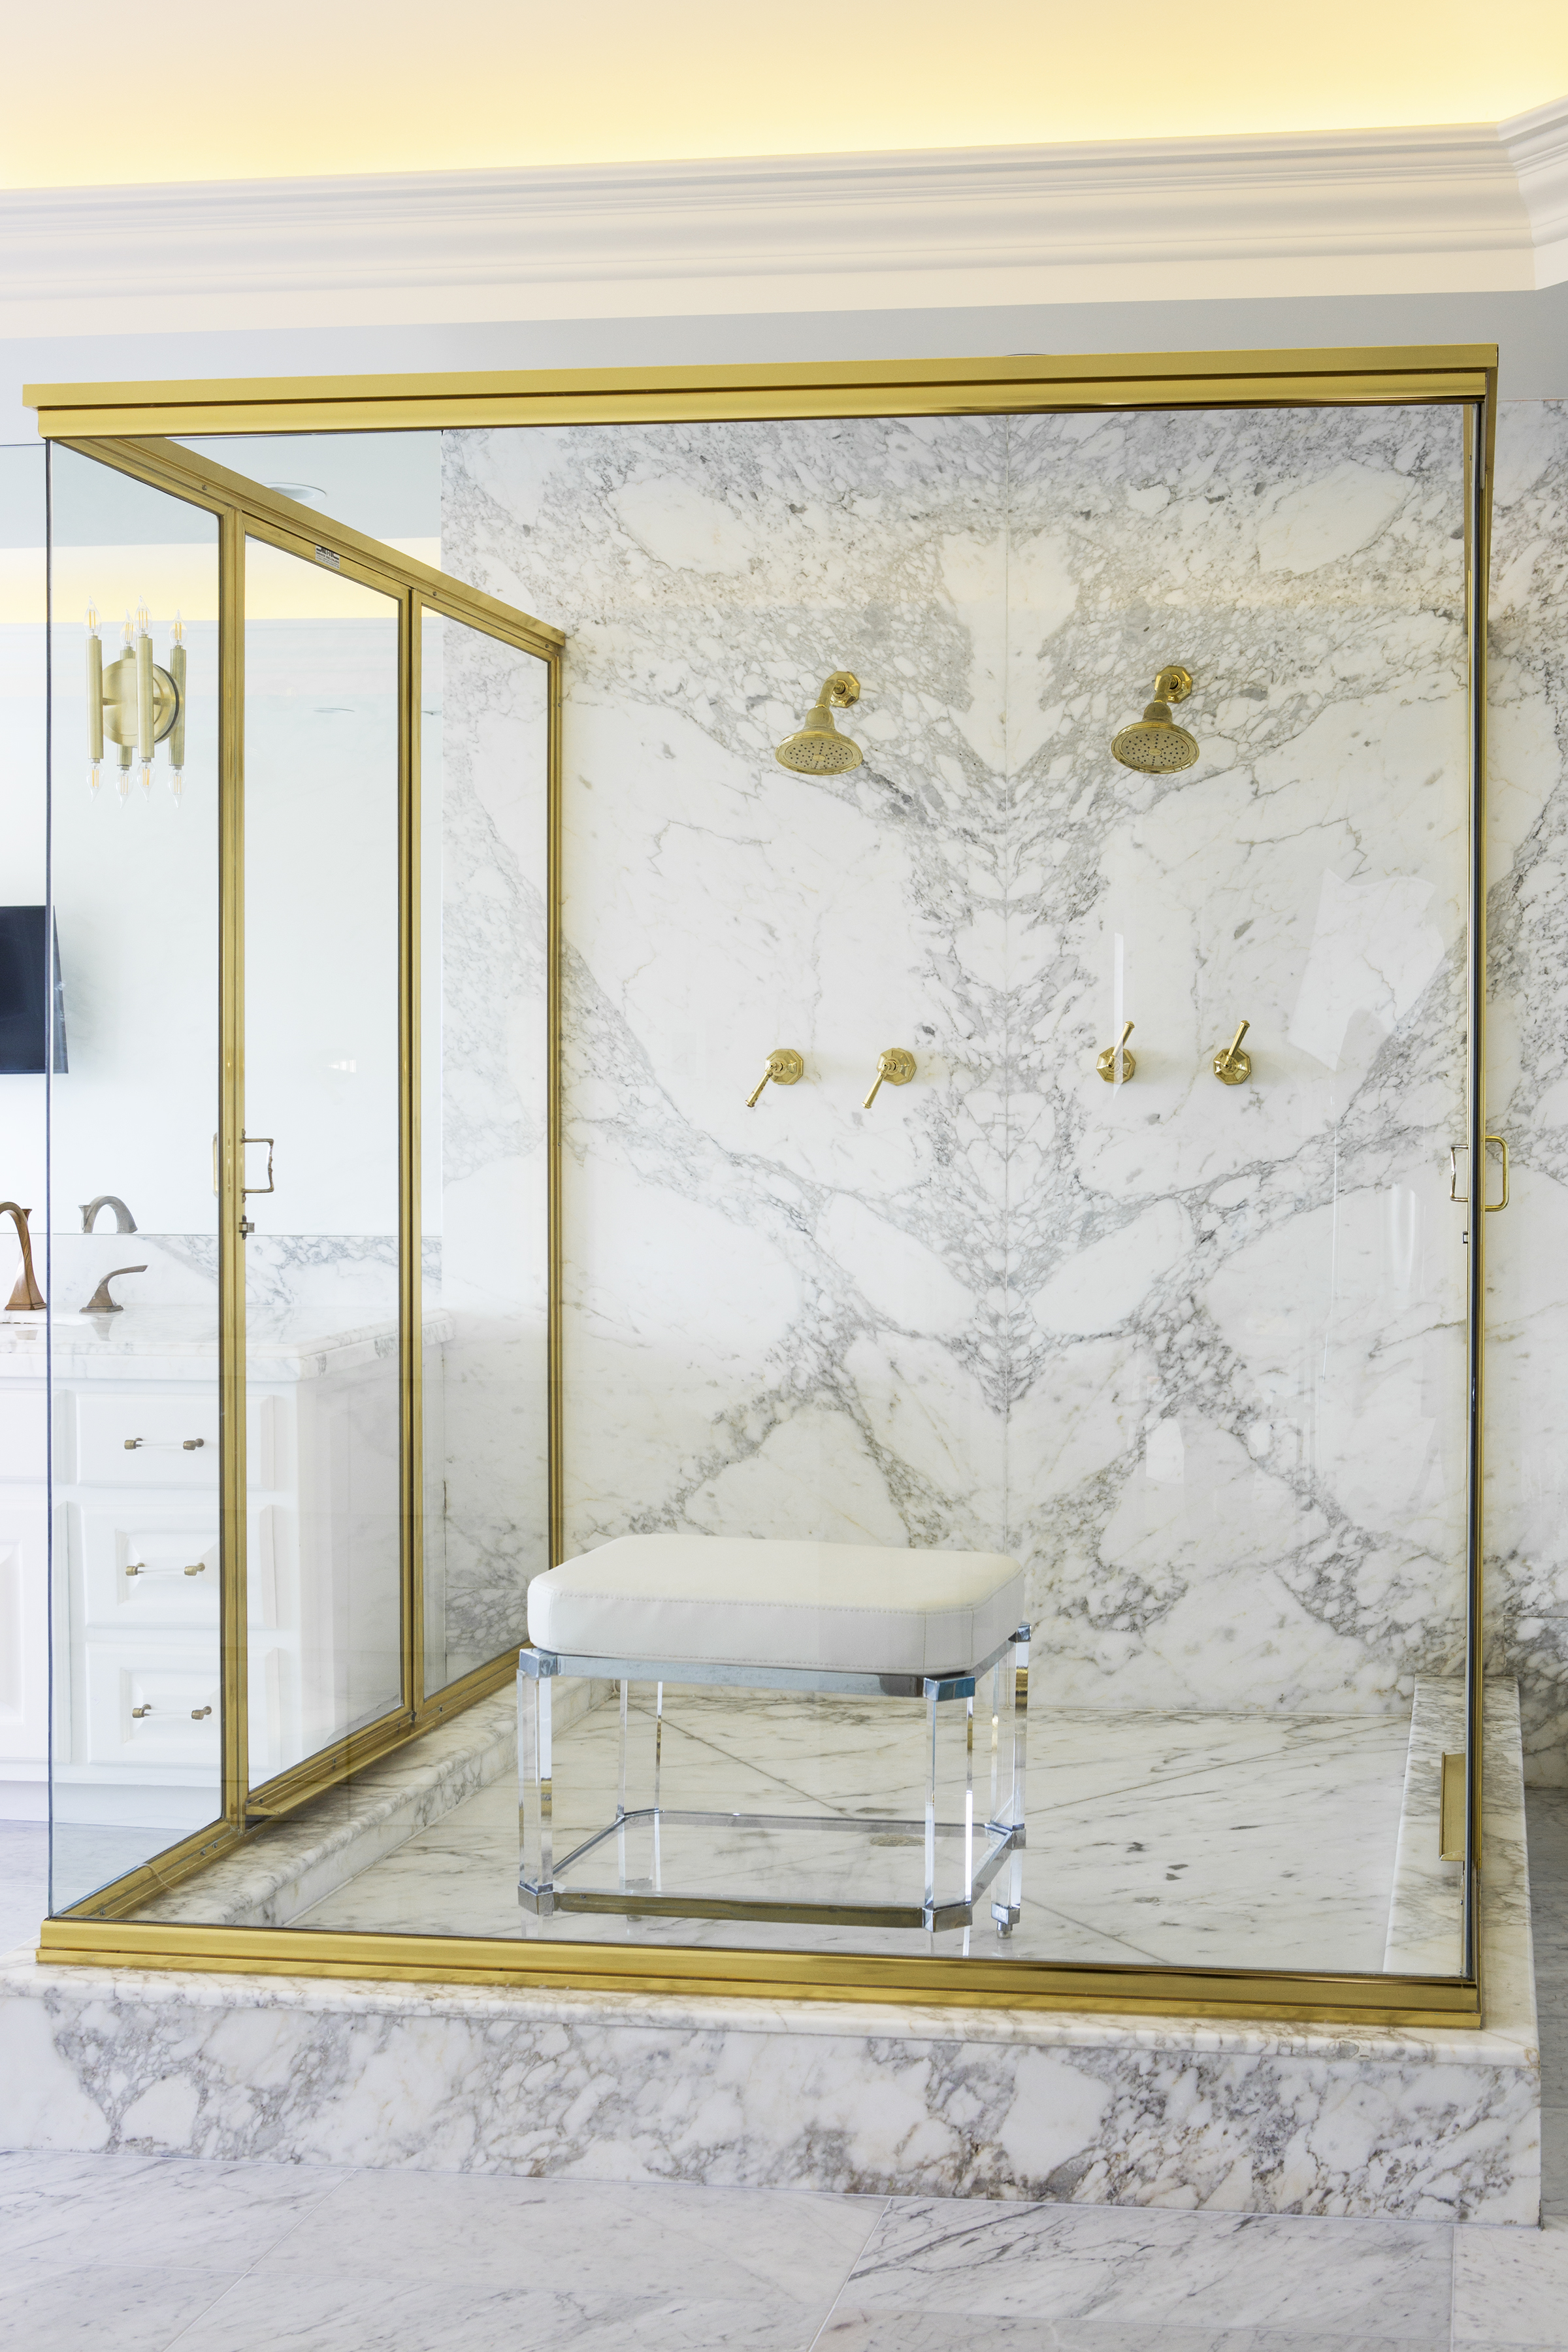 The master bathroom is actually one of my favorite rooms of the home.  Because we liked the marble so much and because of the expense of replacing it we decided to leave the master shower in its original configuration and just replace the Faucets.